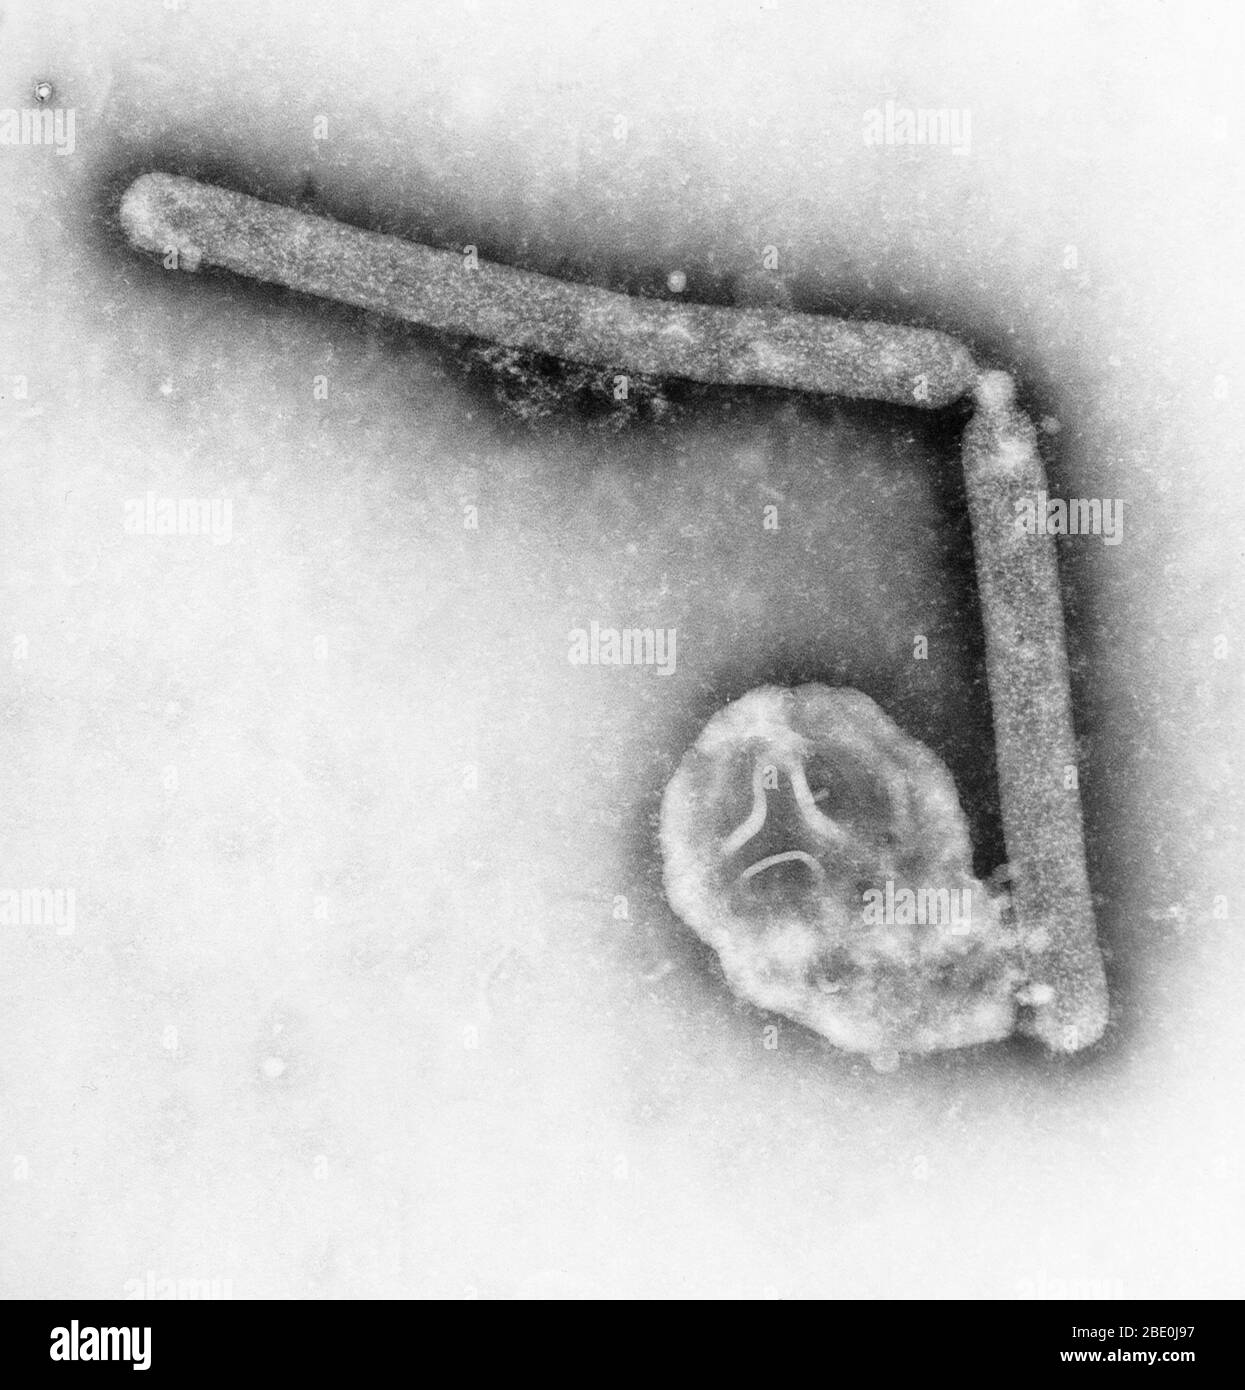 Transmission Electron Micrograph (TEM), revealing the ultrastructural details of two avian influenza A (H5N1) virions, a type of bird flu virus, which is a subtype of avian influenza A. At this magnification, one may note the stippled appearance of the roughened surface of the proteinaceous coat encasing each virion. Although this virus does not typically infect humans, in 1997, the first instance of direct bird-to-human spread of influenza A (H5N1) virus was documented during an outbreak of avian influenza among poultry in Hong Kong. The virus caused severe respiratory illness in 18 people, o Stock Photo